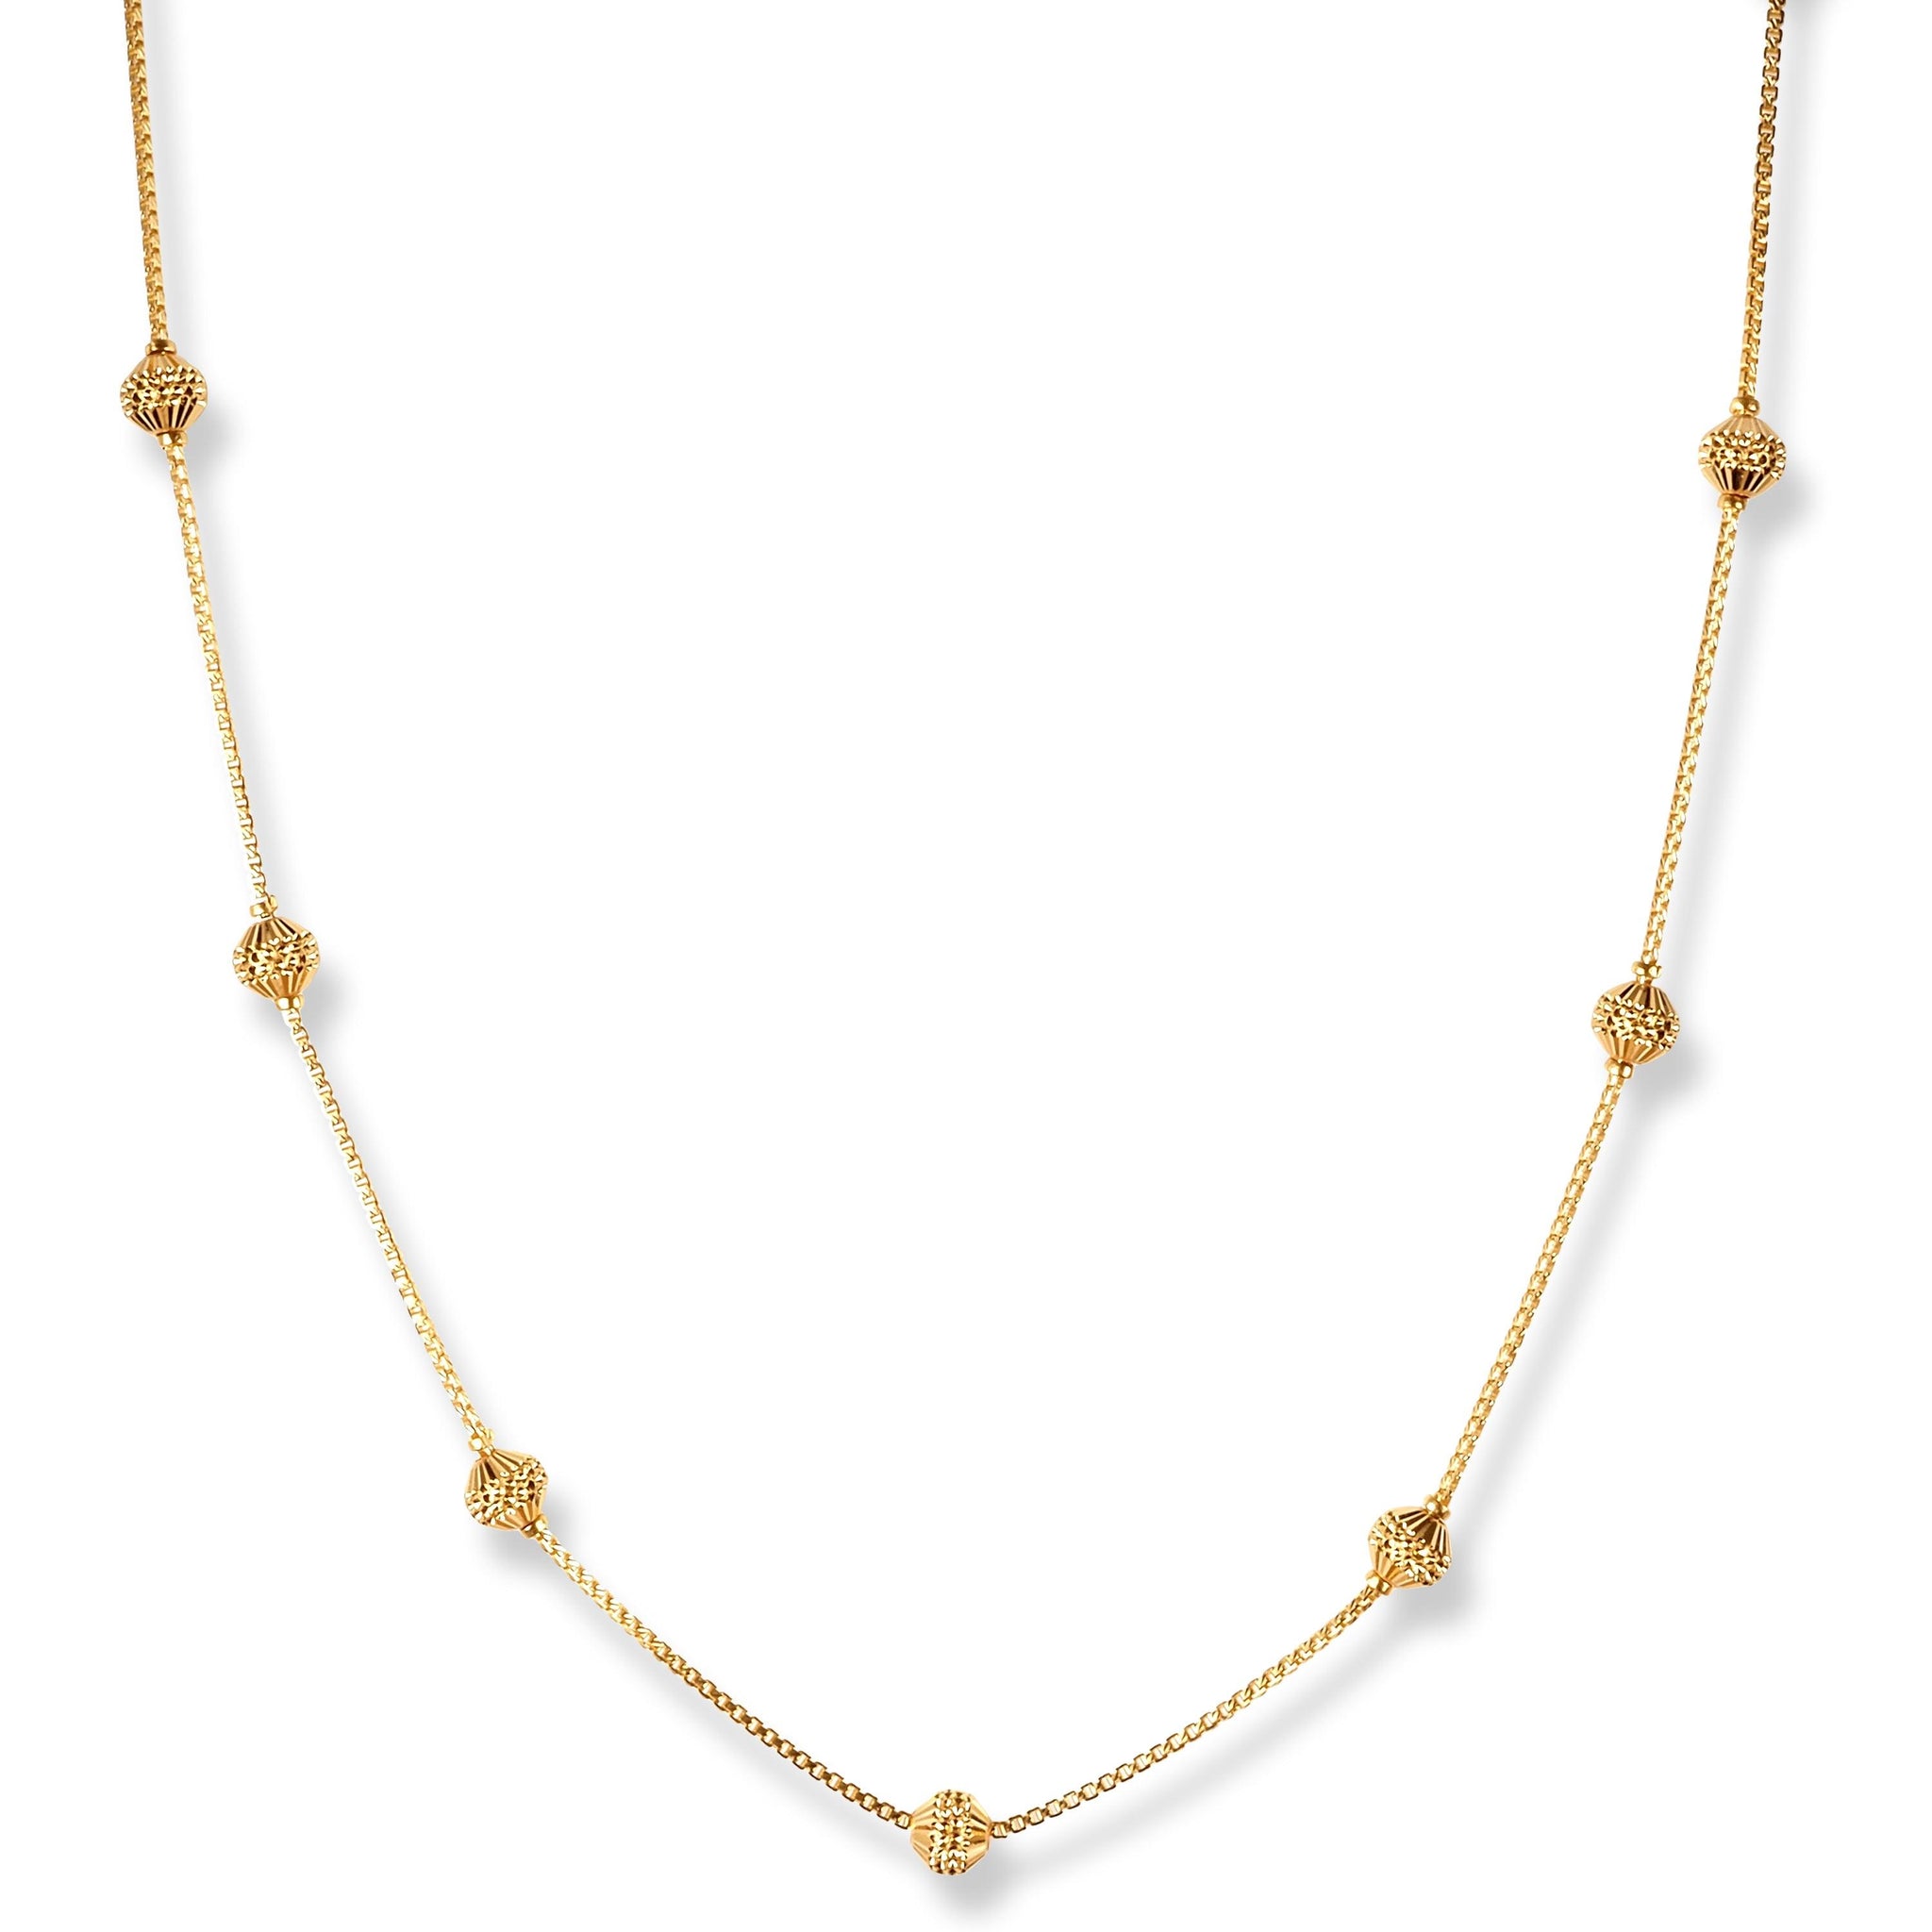 22ct Gold Chain With Diamond Cut Beads and Lobster Clasp C-7146